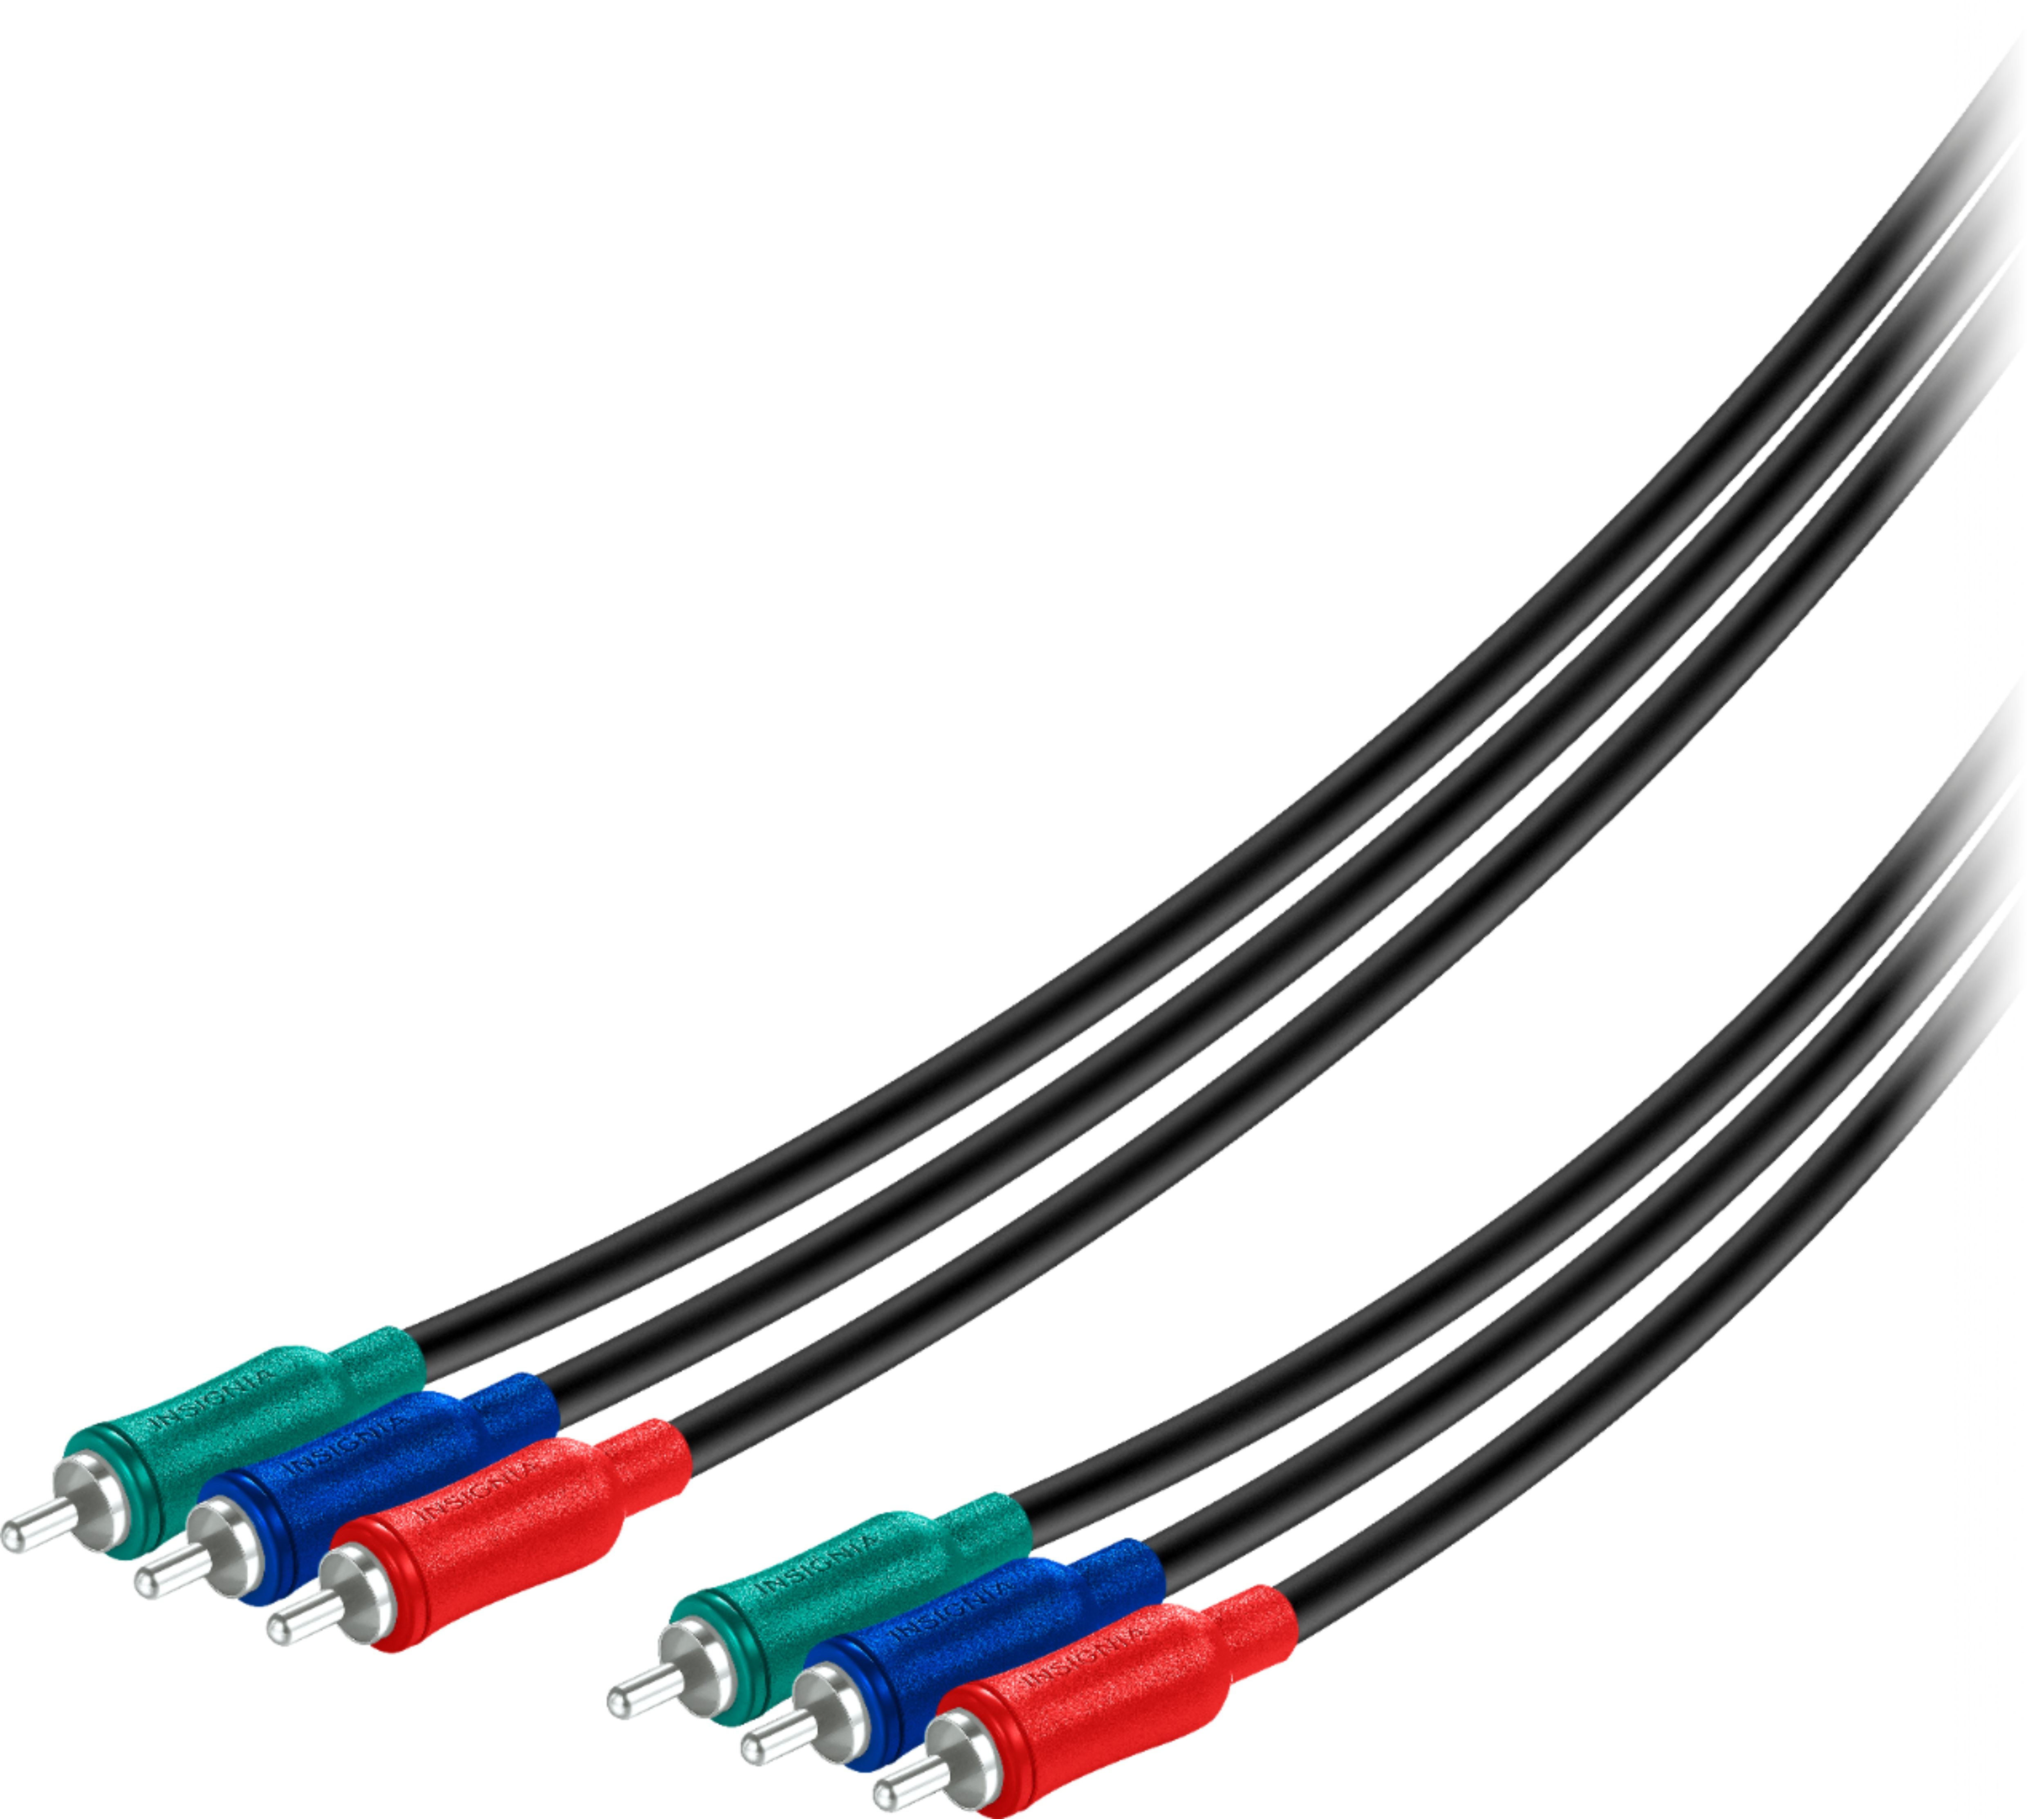 Angle View: AudioQuest - Water 3.3' XLR Interconnect Cable - Black/Blue